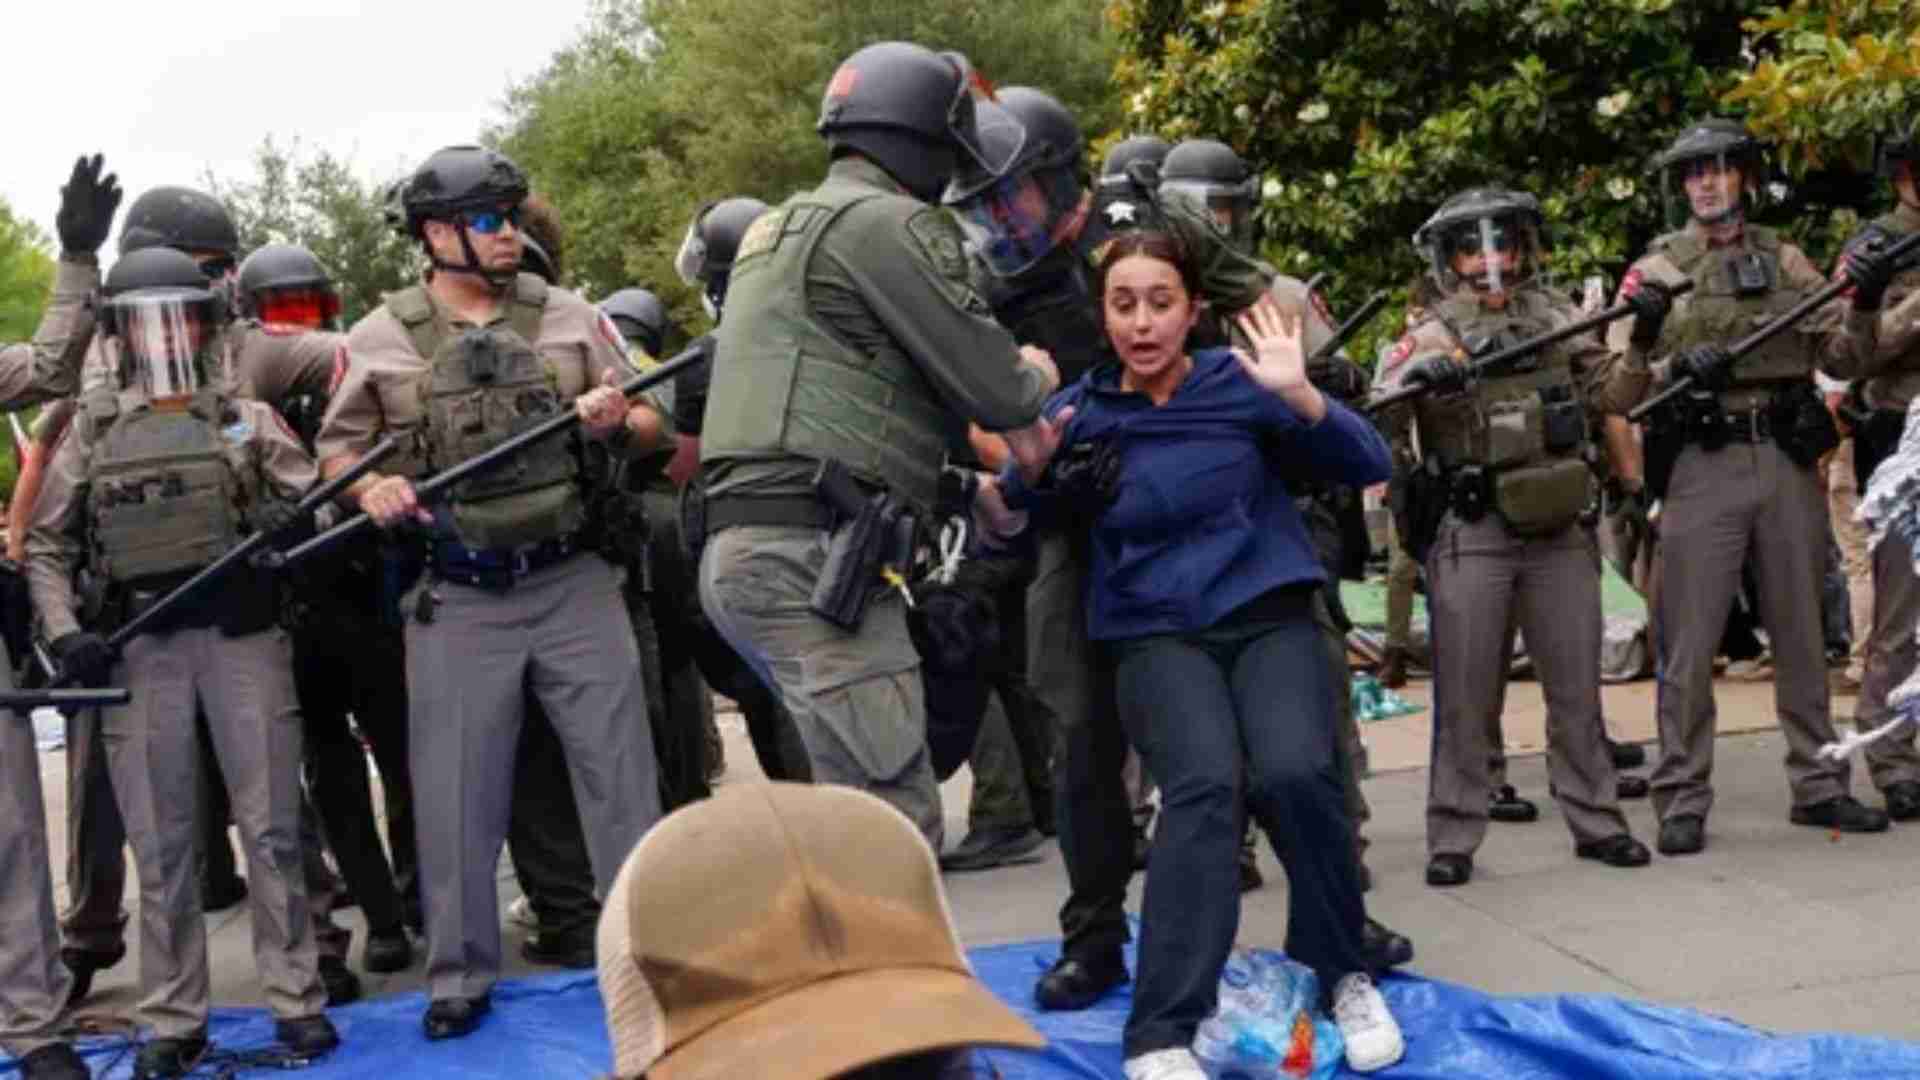 Hundreds of students have been arrested during rallies against the Israel-Hamas war on many US college and university campuses